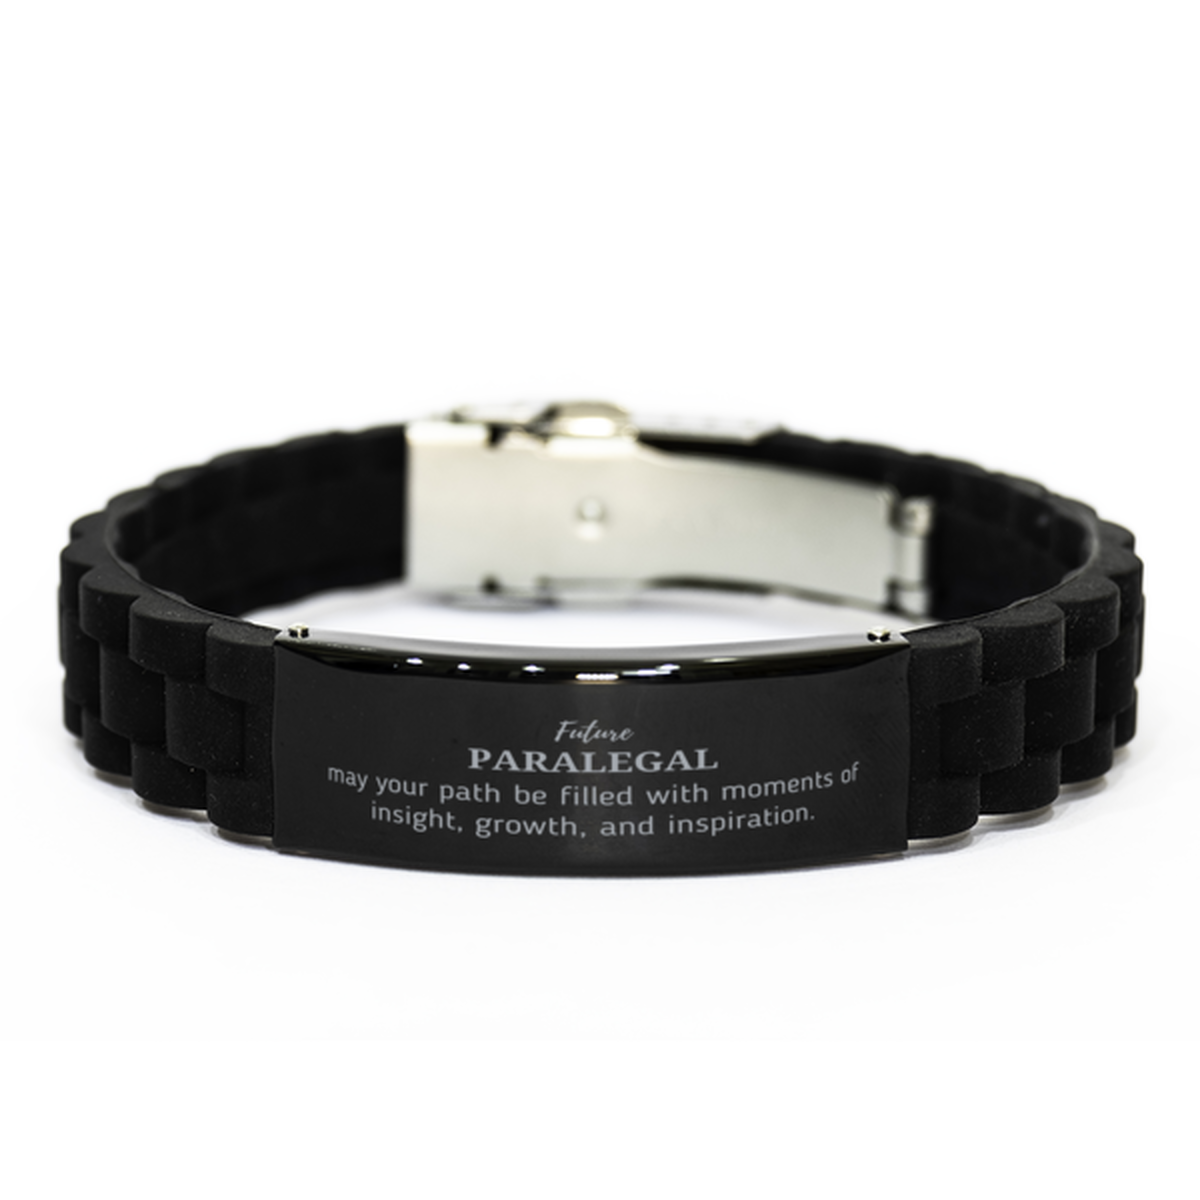 Future Paralegal Gifts, May your path be filled with moments of insight, Graduation Gifts for New Paralegal, Christmas Unique Black Glidelock Clasp Bracelet For Men, Women, Friends